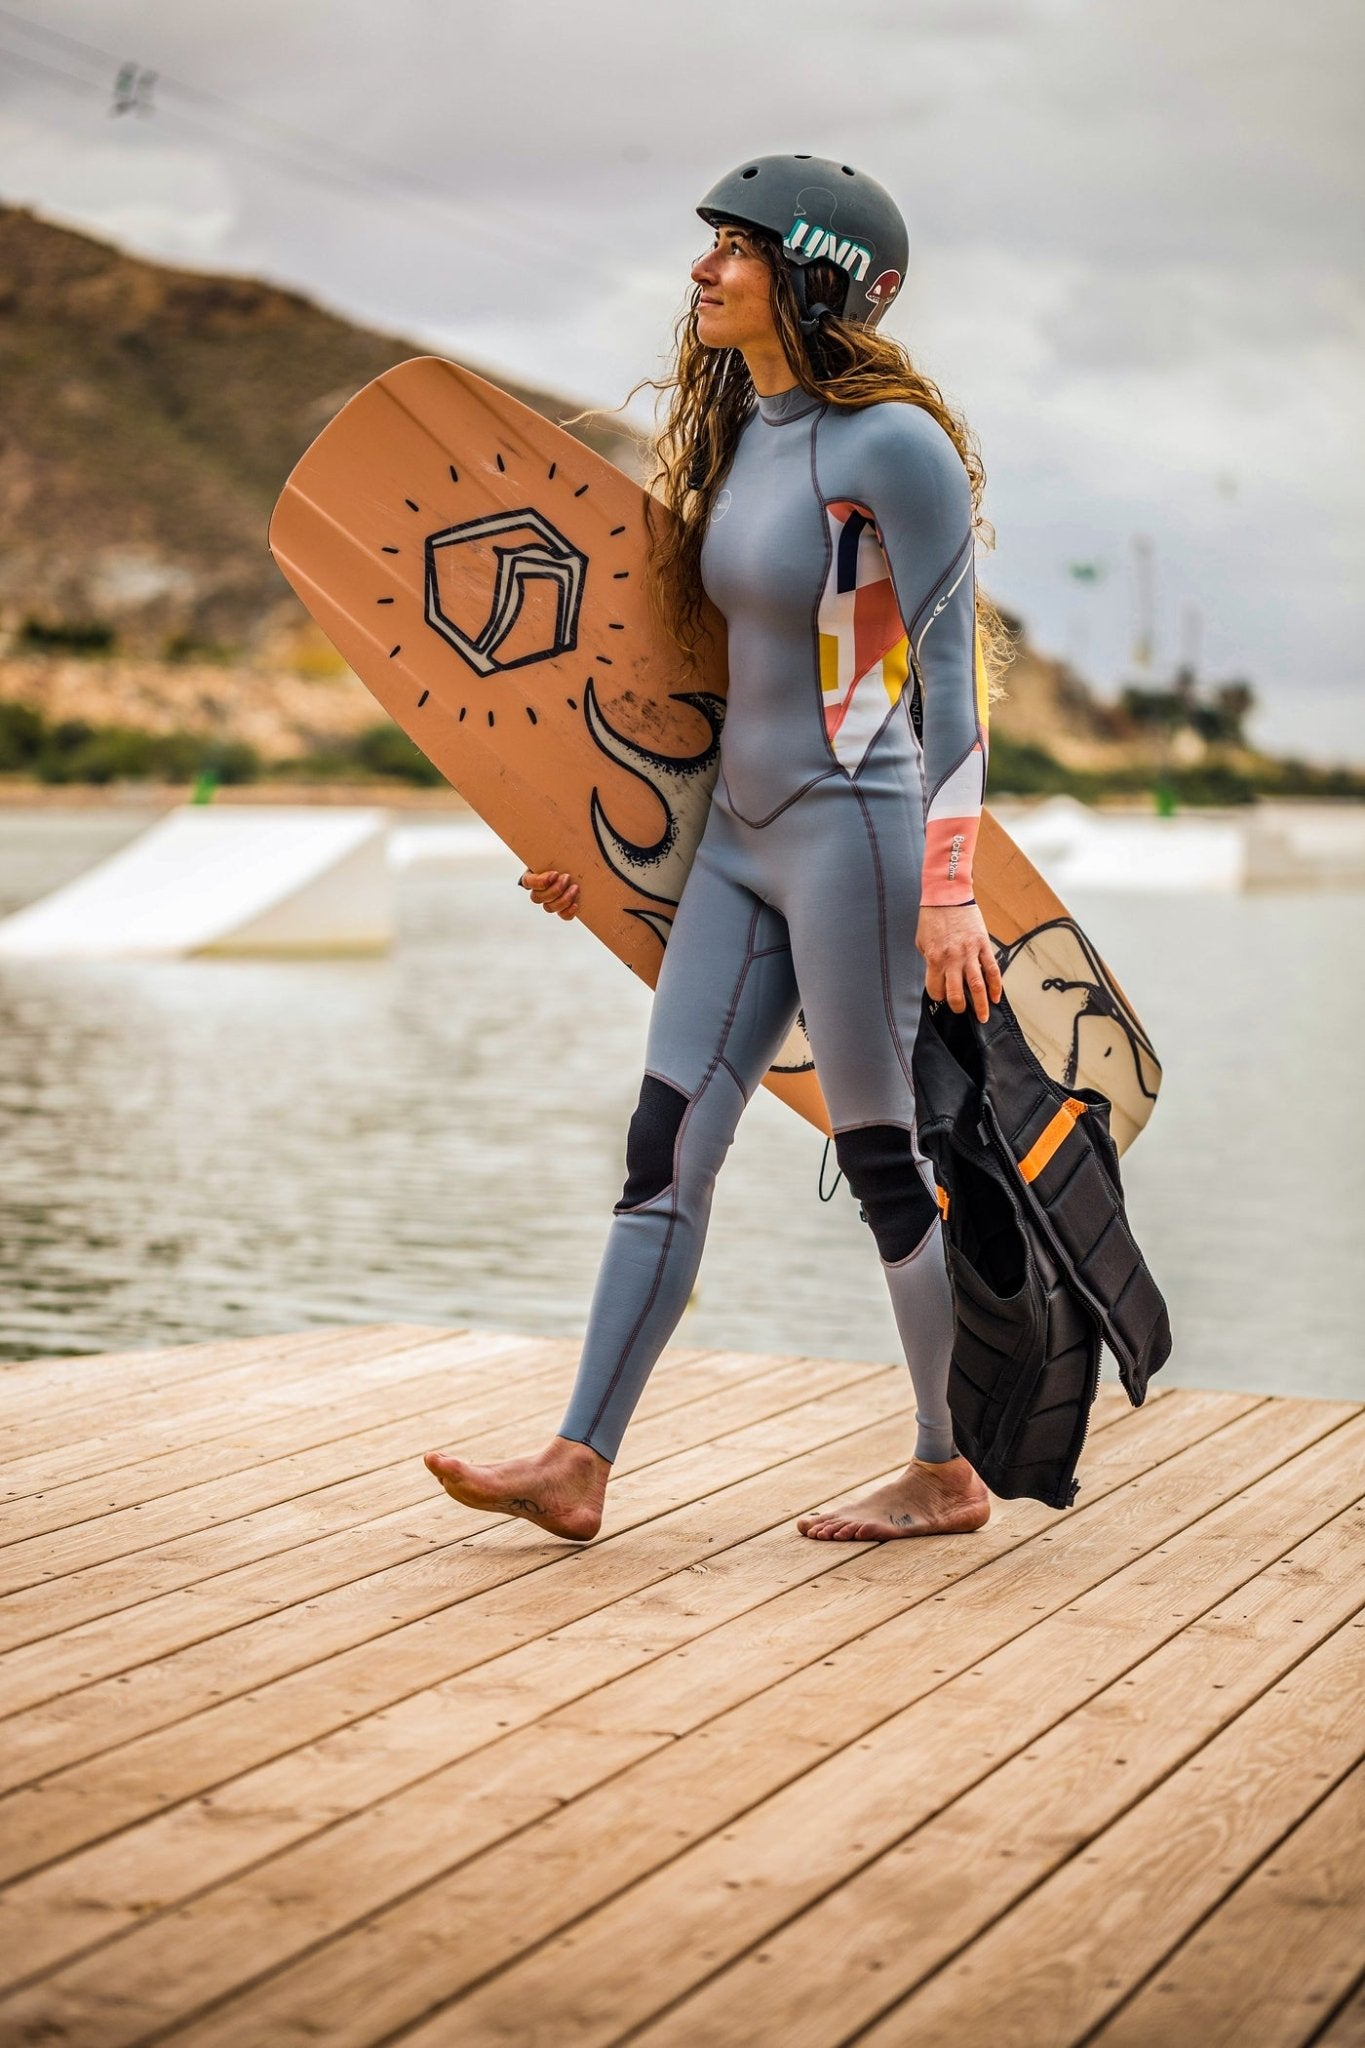 O'Neill Bahia 3mm Back Zip Mujeres Wetsuit